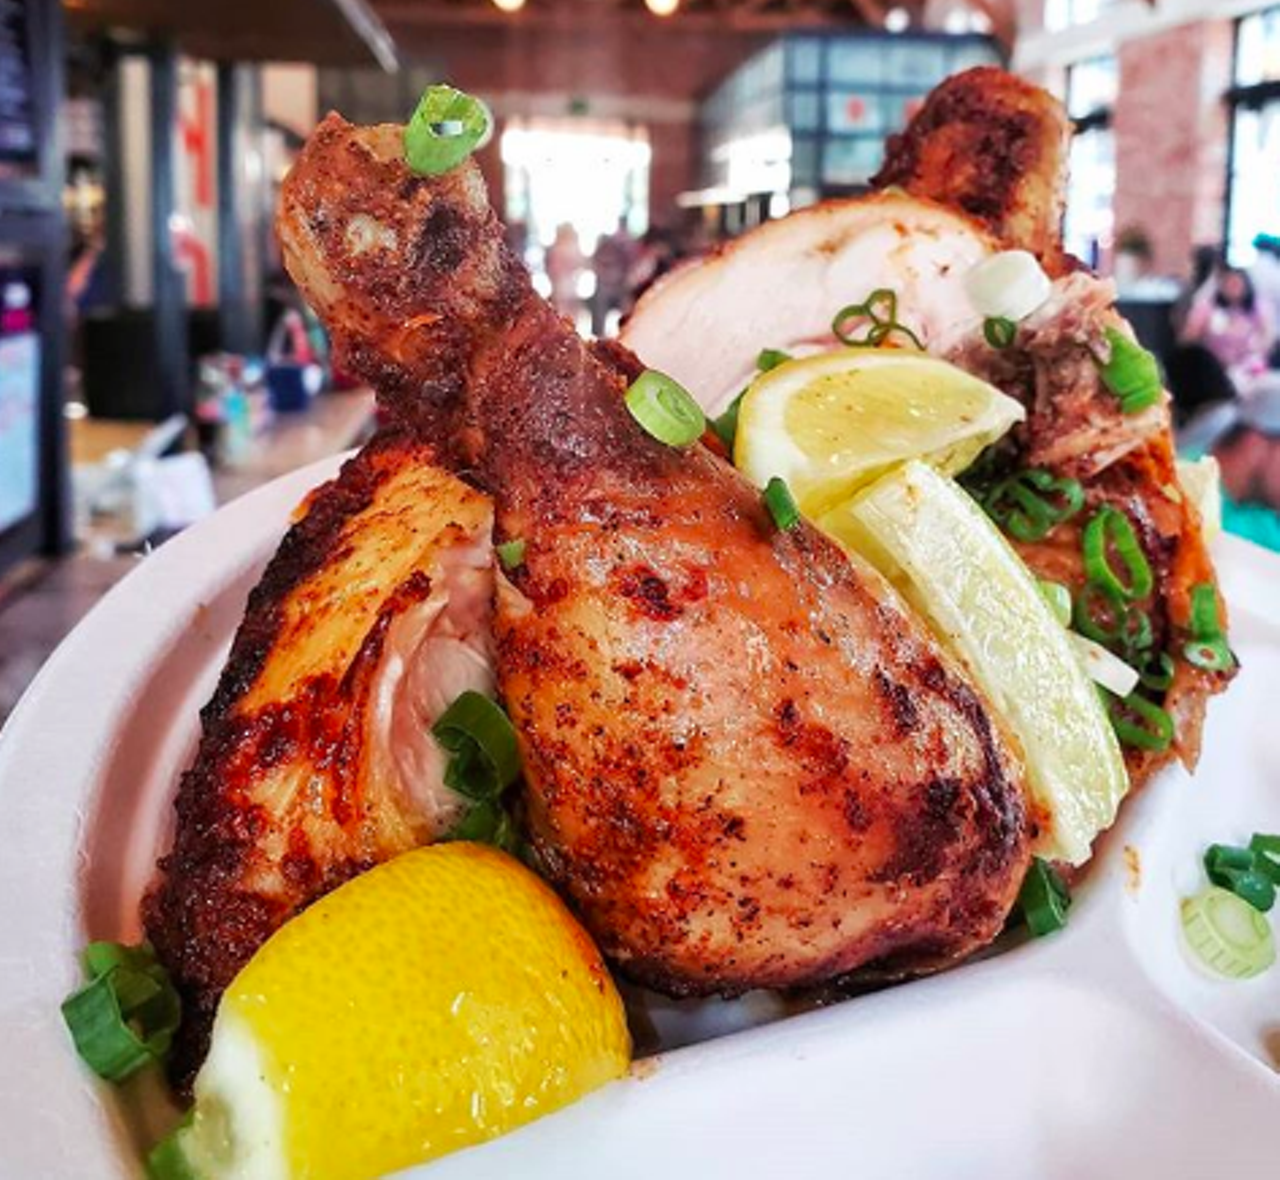 Opened by New Orleans transplant Pieter Sypesteyn, Bud’s brings you rotisserie chicken in individual plates or family-style. If you’re a pork type of guy, you have that option too. So next time you’re getting your bougie fix at the Pearl, stop by Bud’s for some authentic eats.
Photo via Instagram / carolion1231